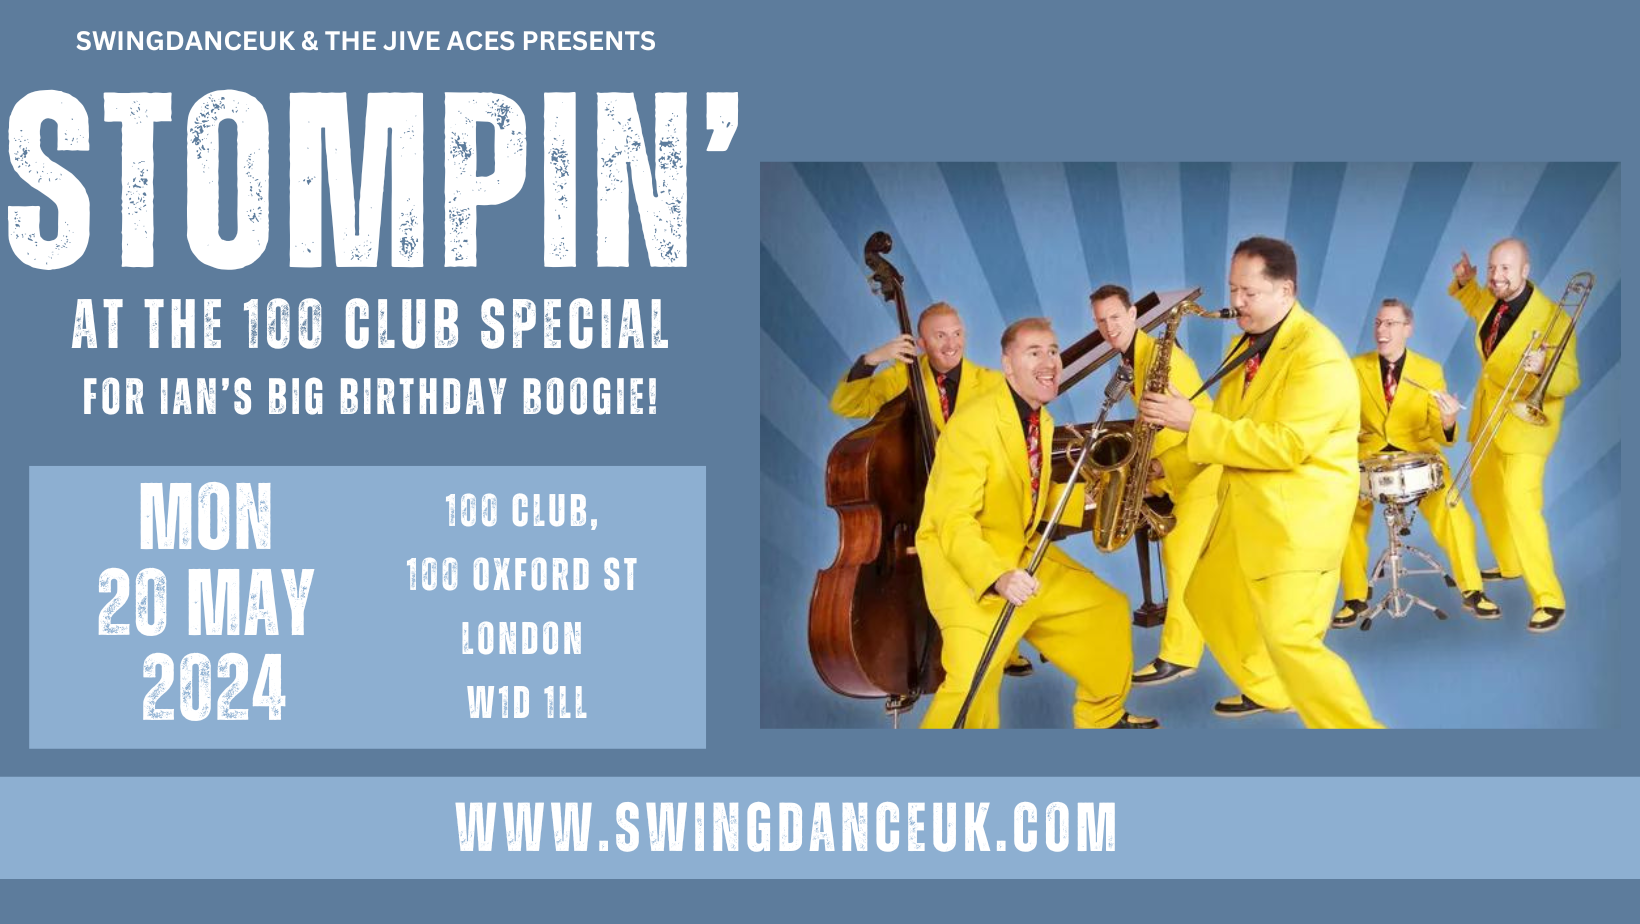 Stompin' at the 100 Club 20 May 2024 featuring The Jive Aces